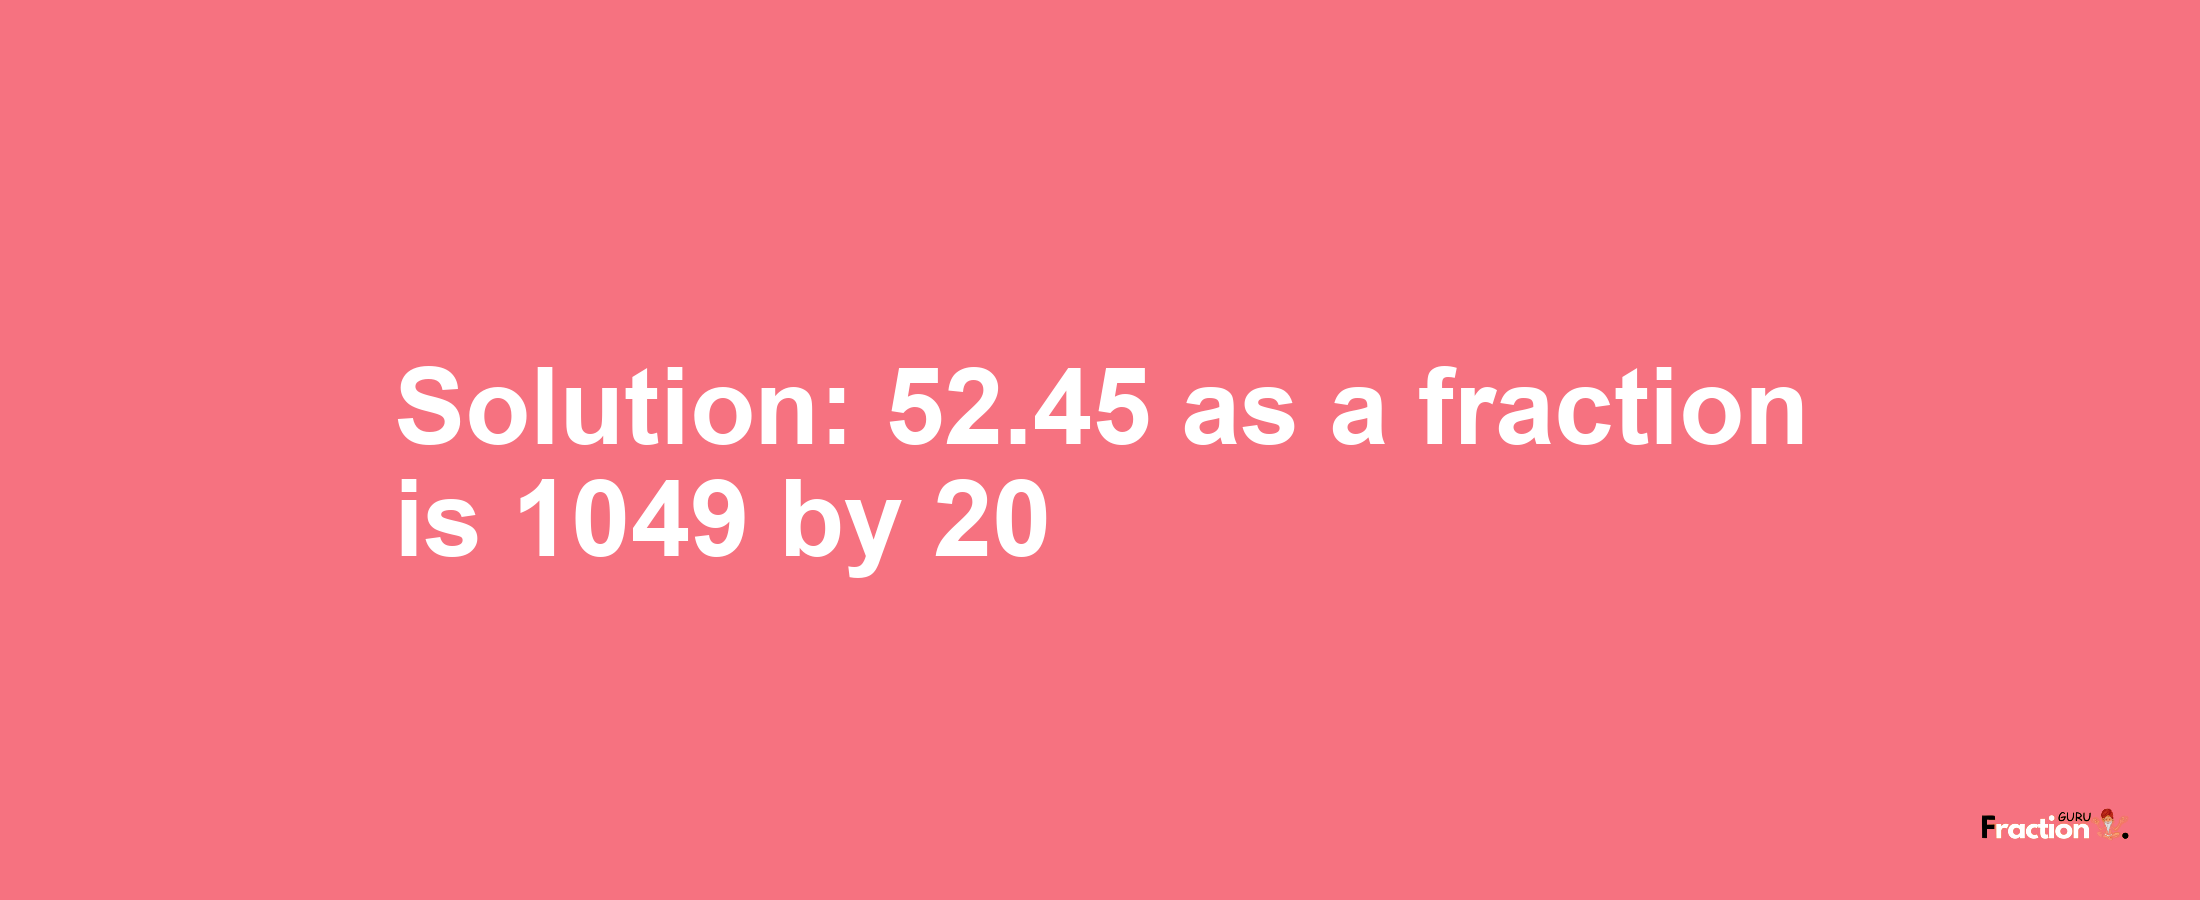 Solution:52.45 as a fraction is 1049/20